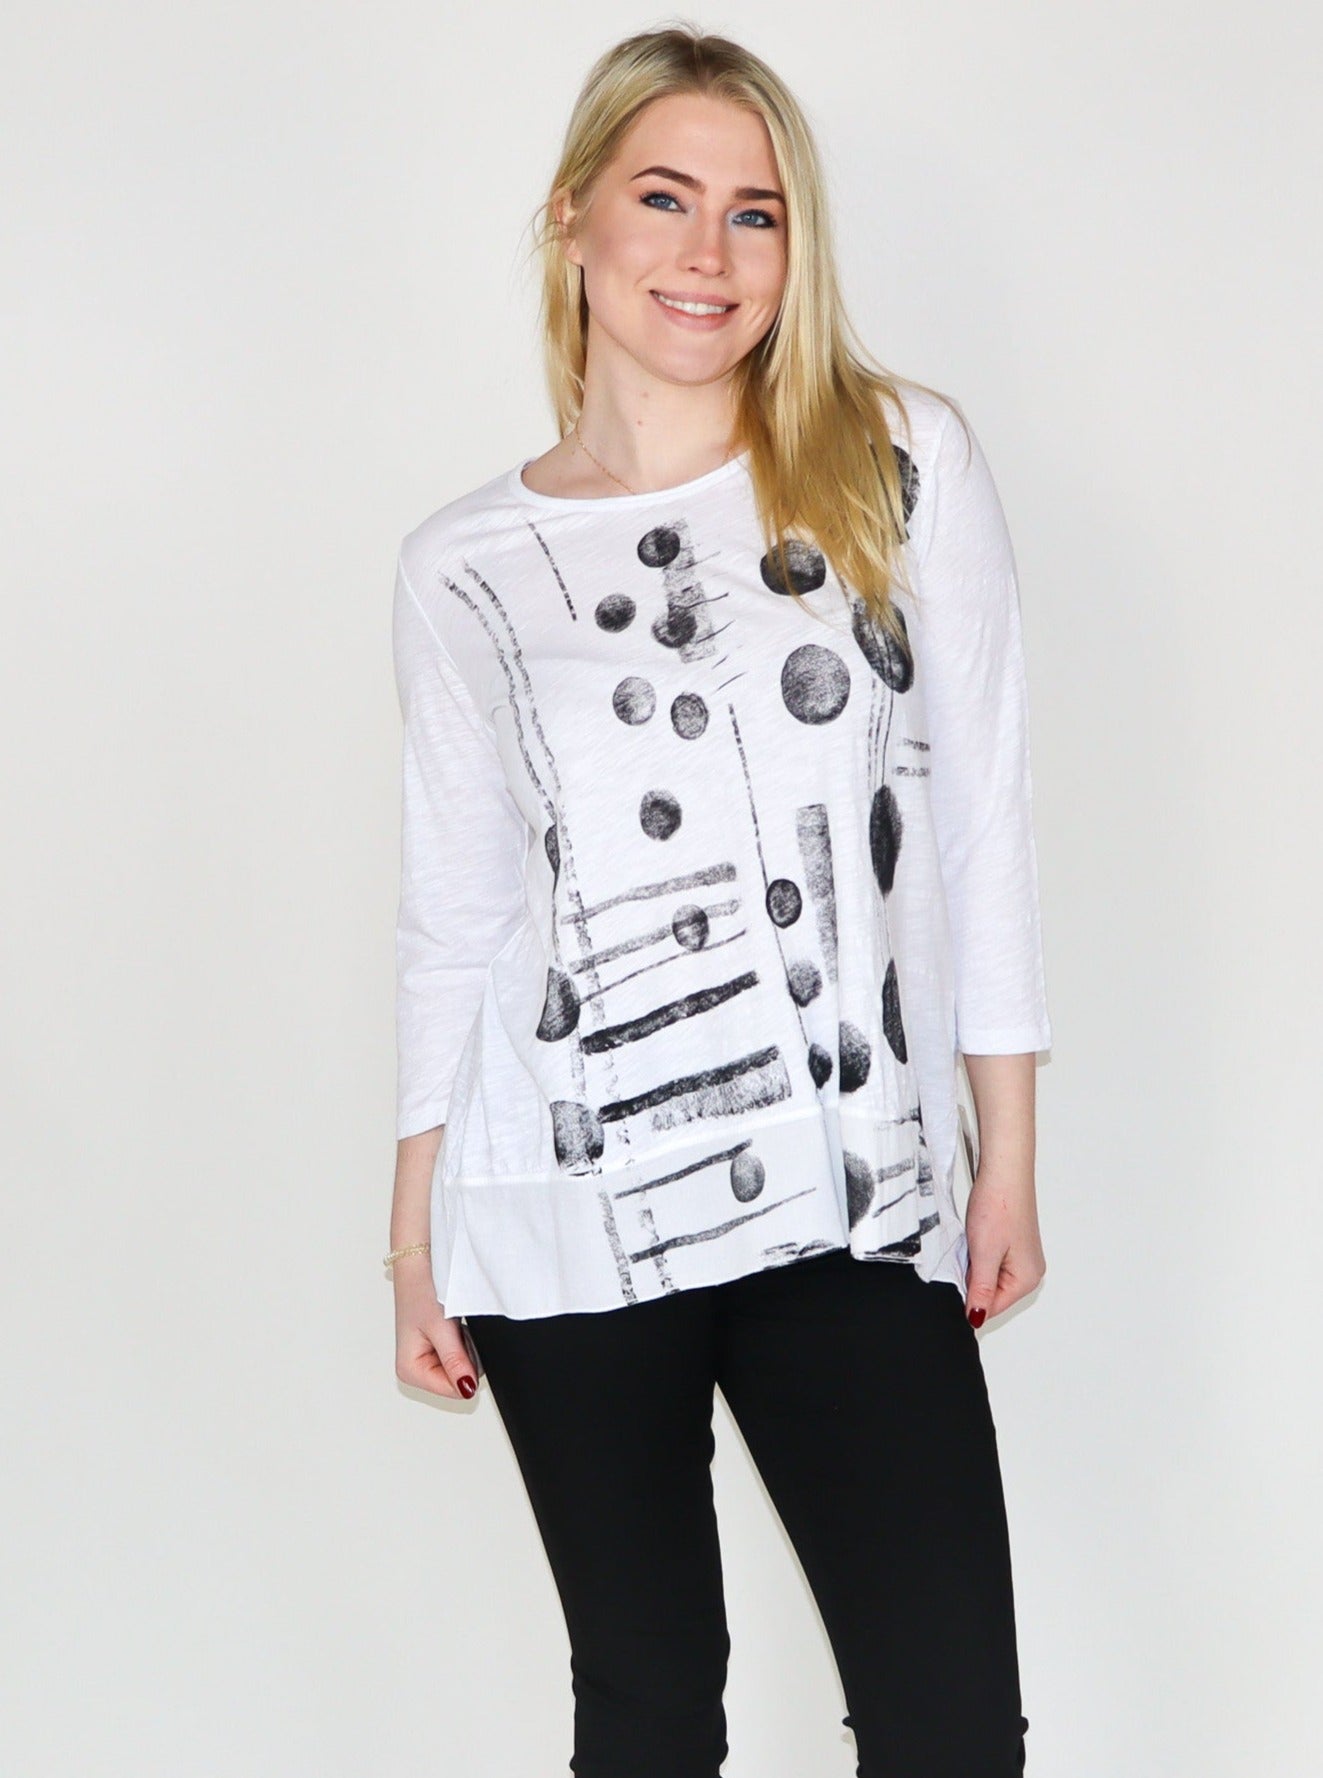 Model is wearing a white 3/4th sleeve tunic top with black abstract print. Top is paired with black skinny jeans. 